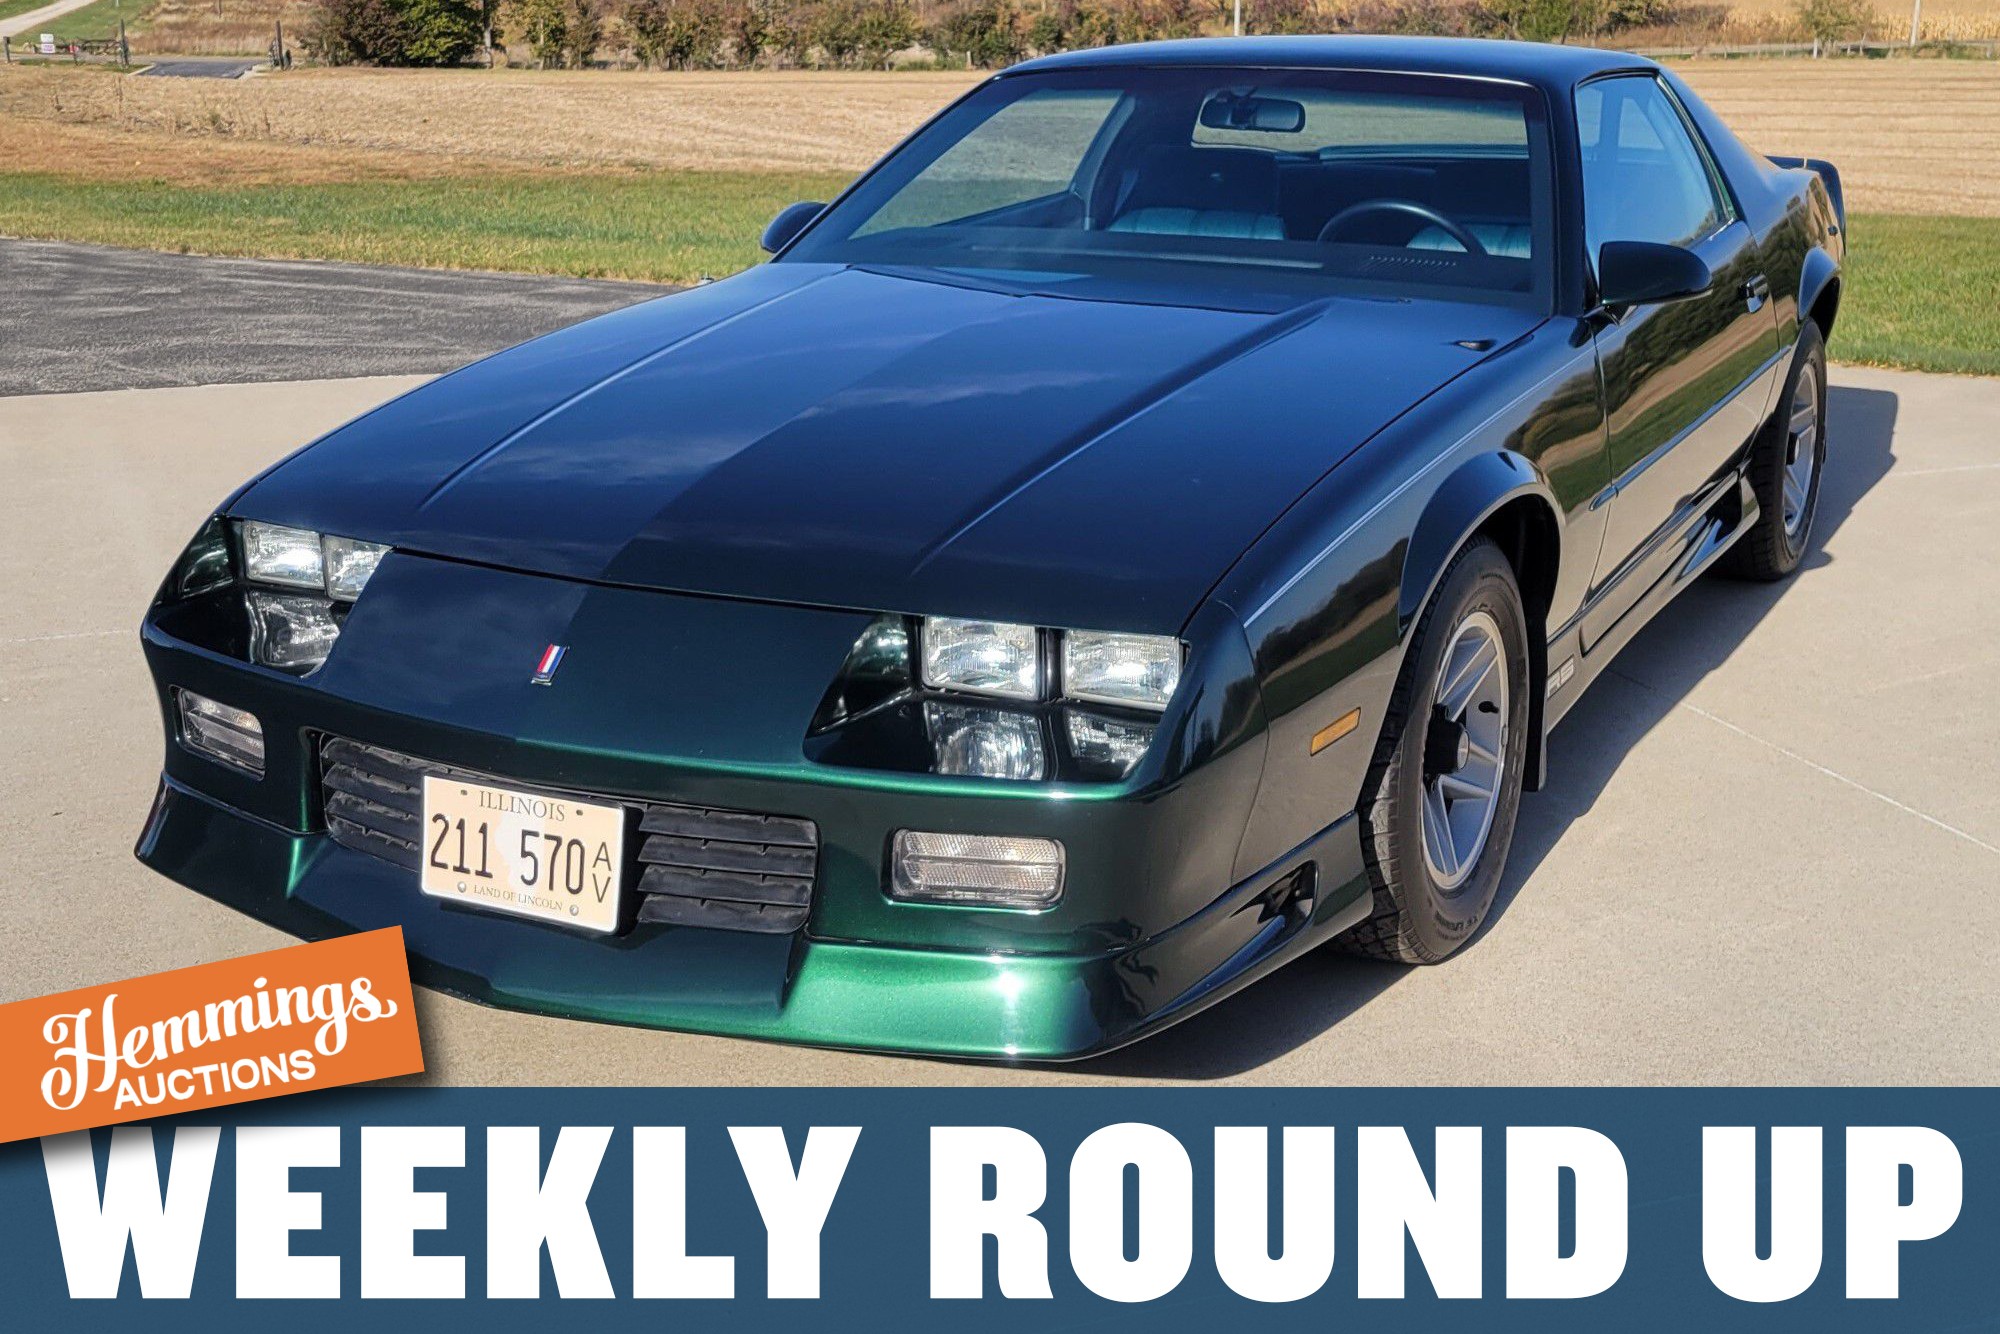 Hemmings Auctions Weekly Round Up: 1992 Chevrolet Camaro RS, 1959 Triumph TR3A, 1967 Ford GT 500